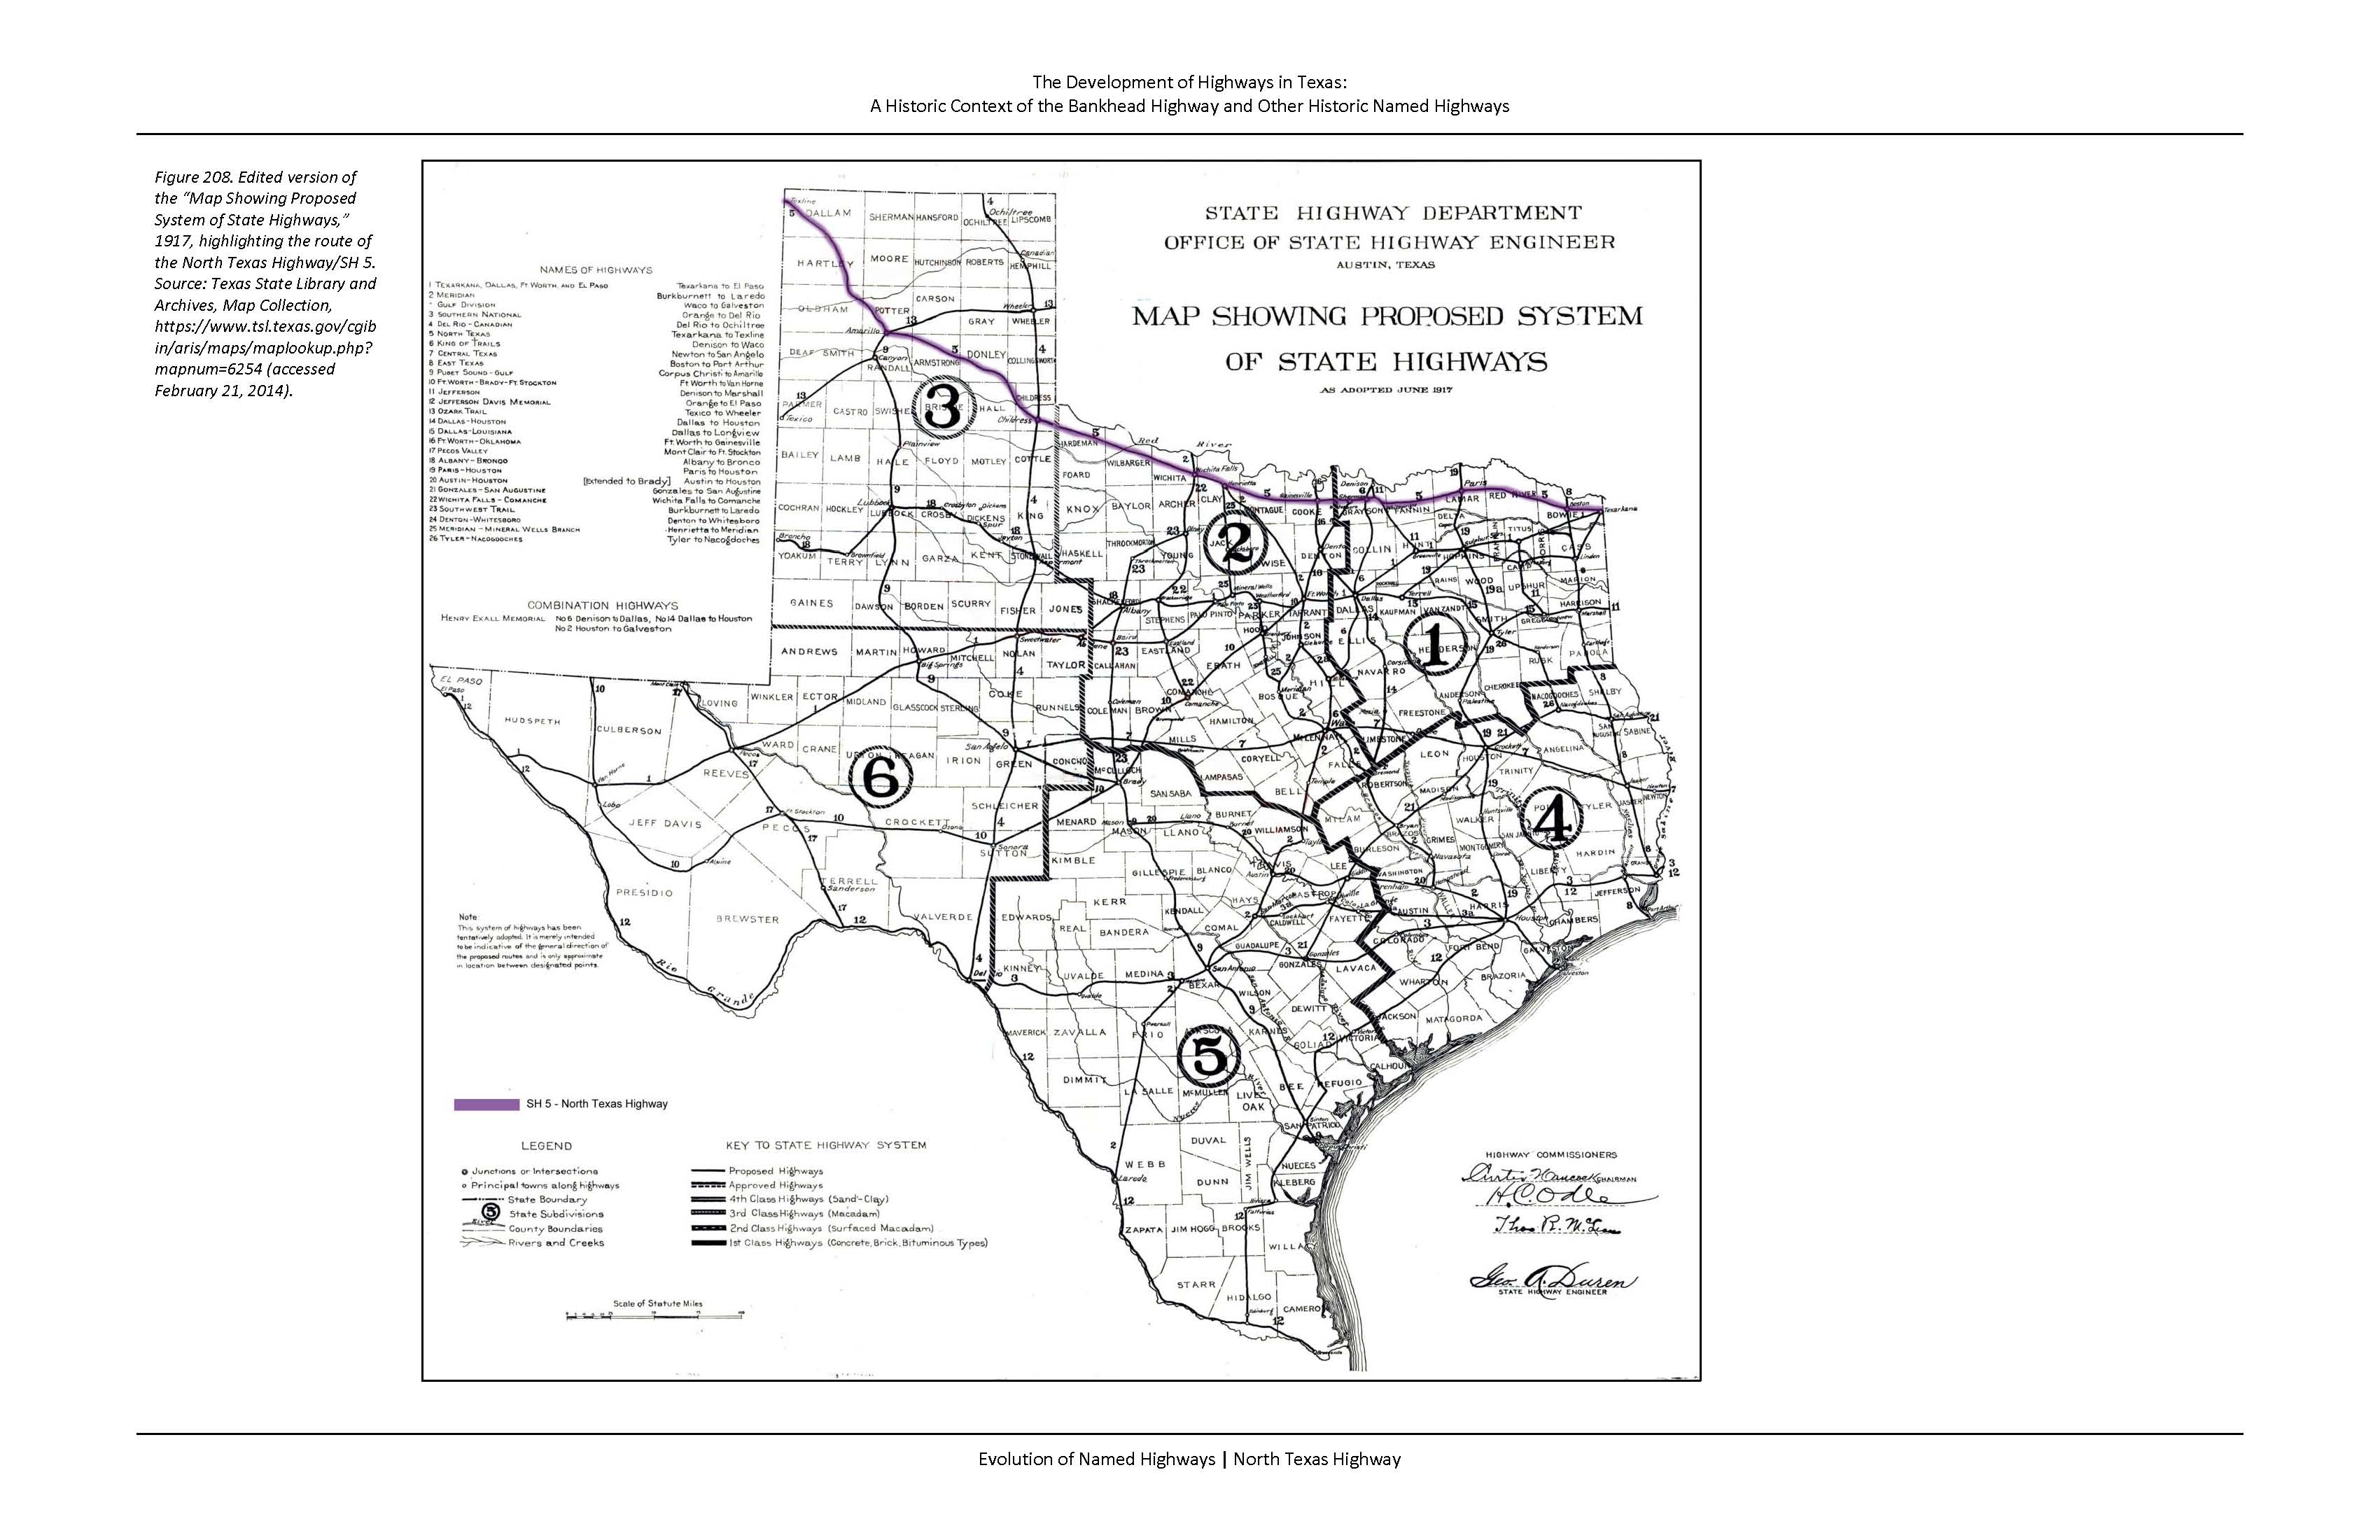 A black-and-white map of the North Texas Highway